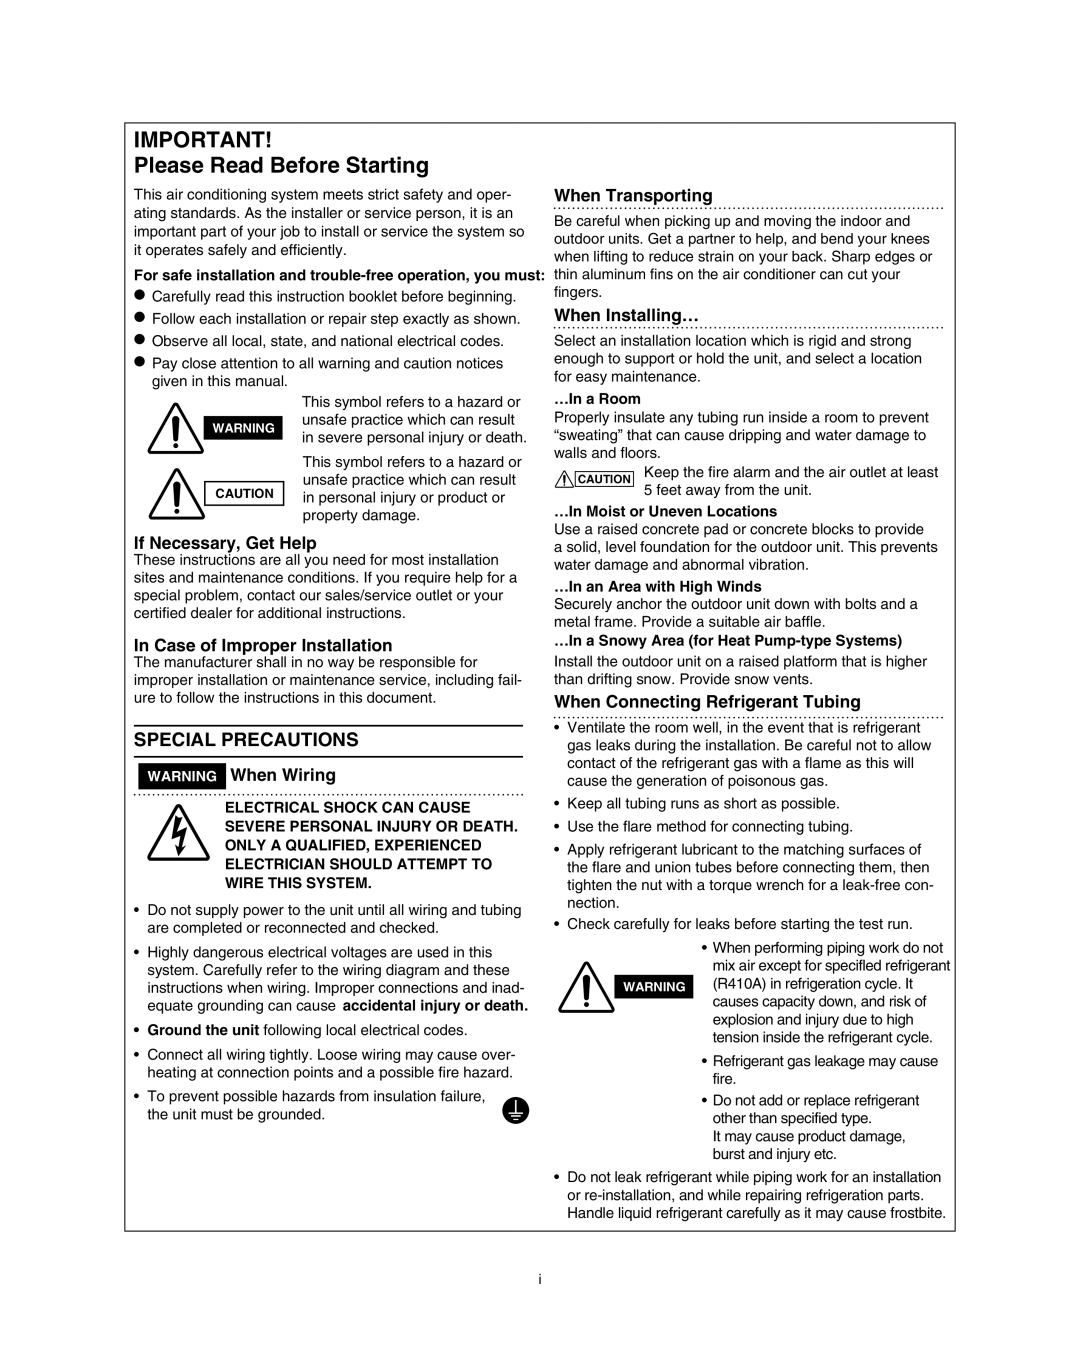 Panasonic R410A Please Read Before Starting, Special Precautions, When Transporting, When Installing…, WARNING When Wiring 